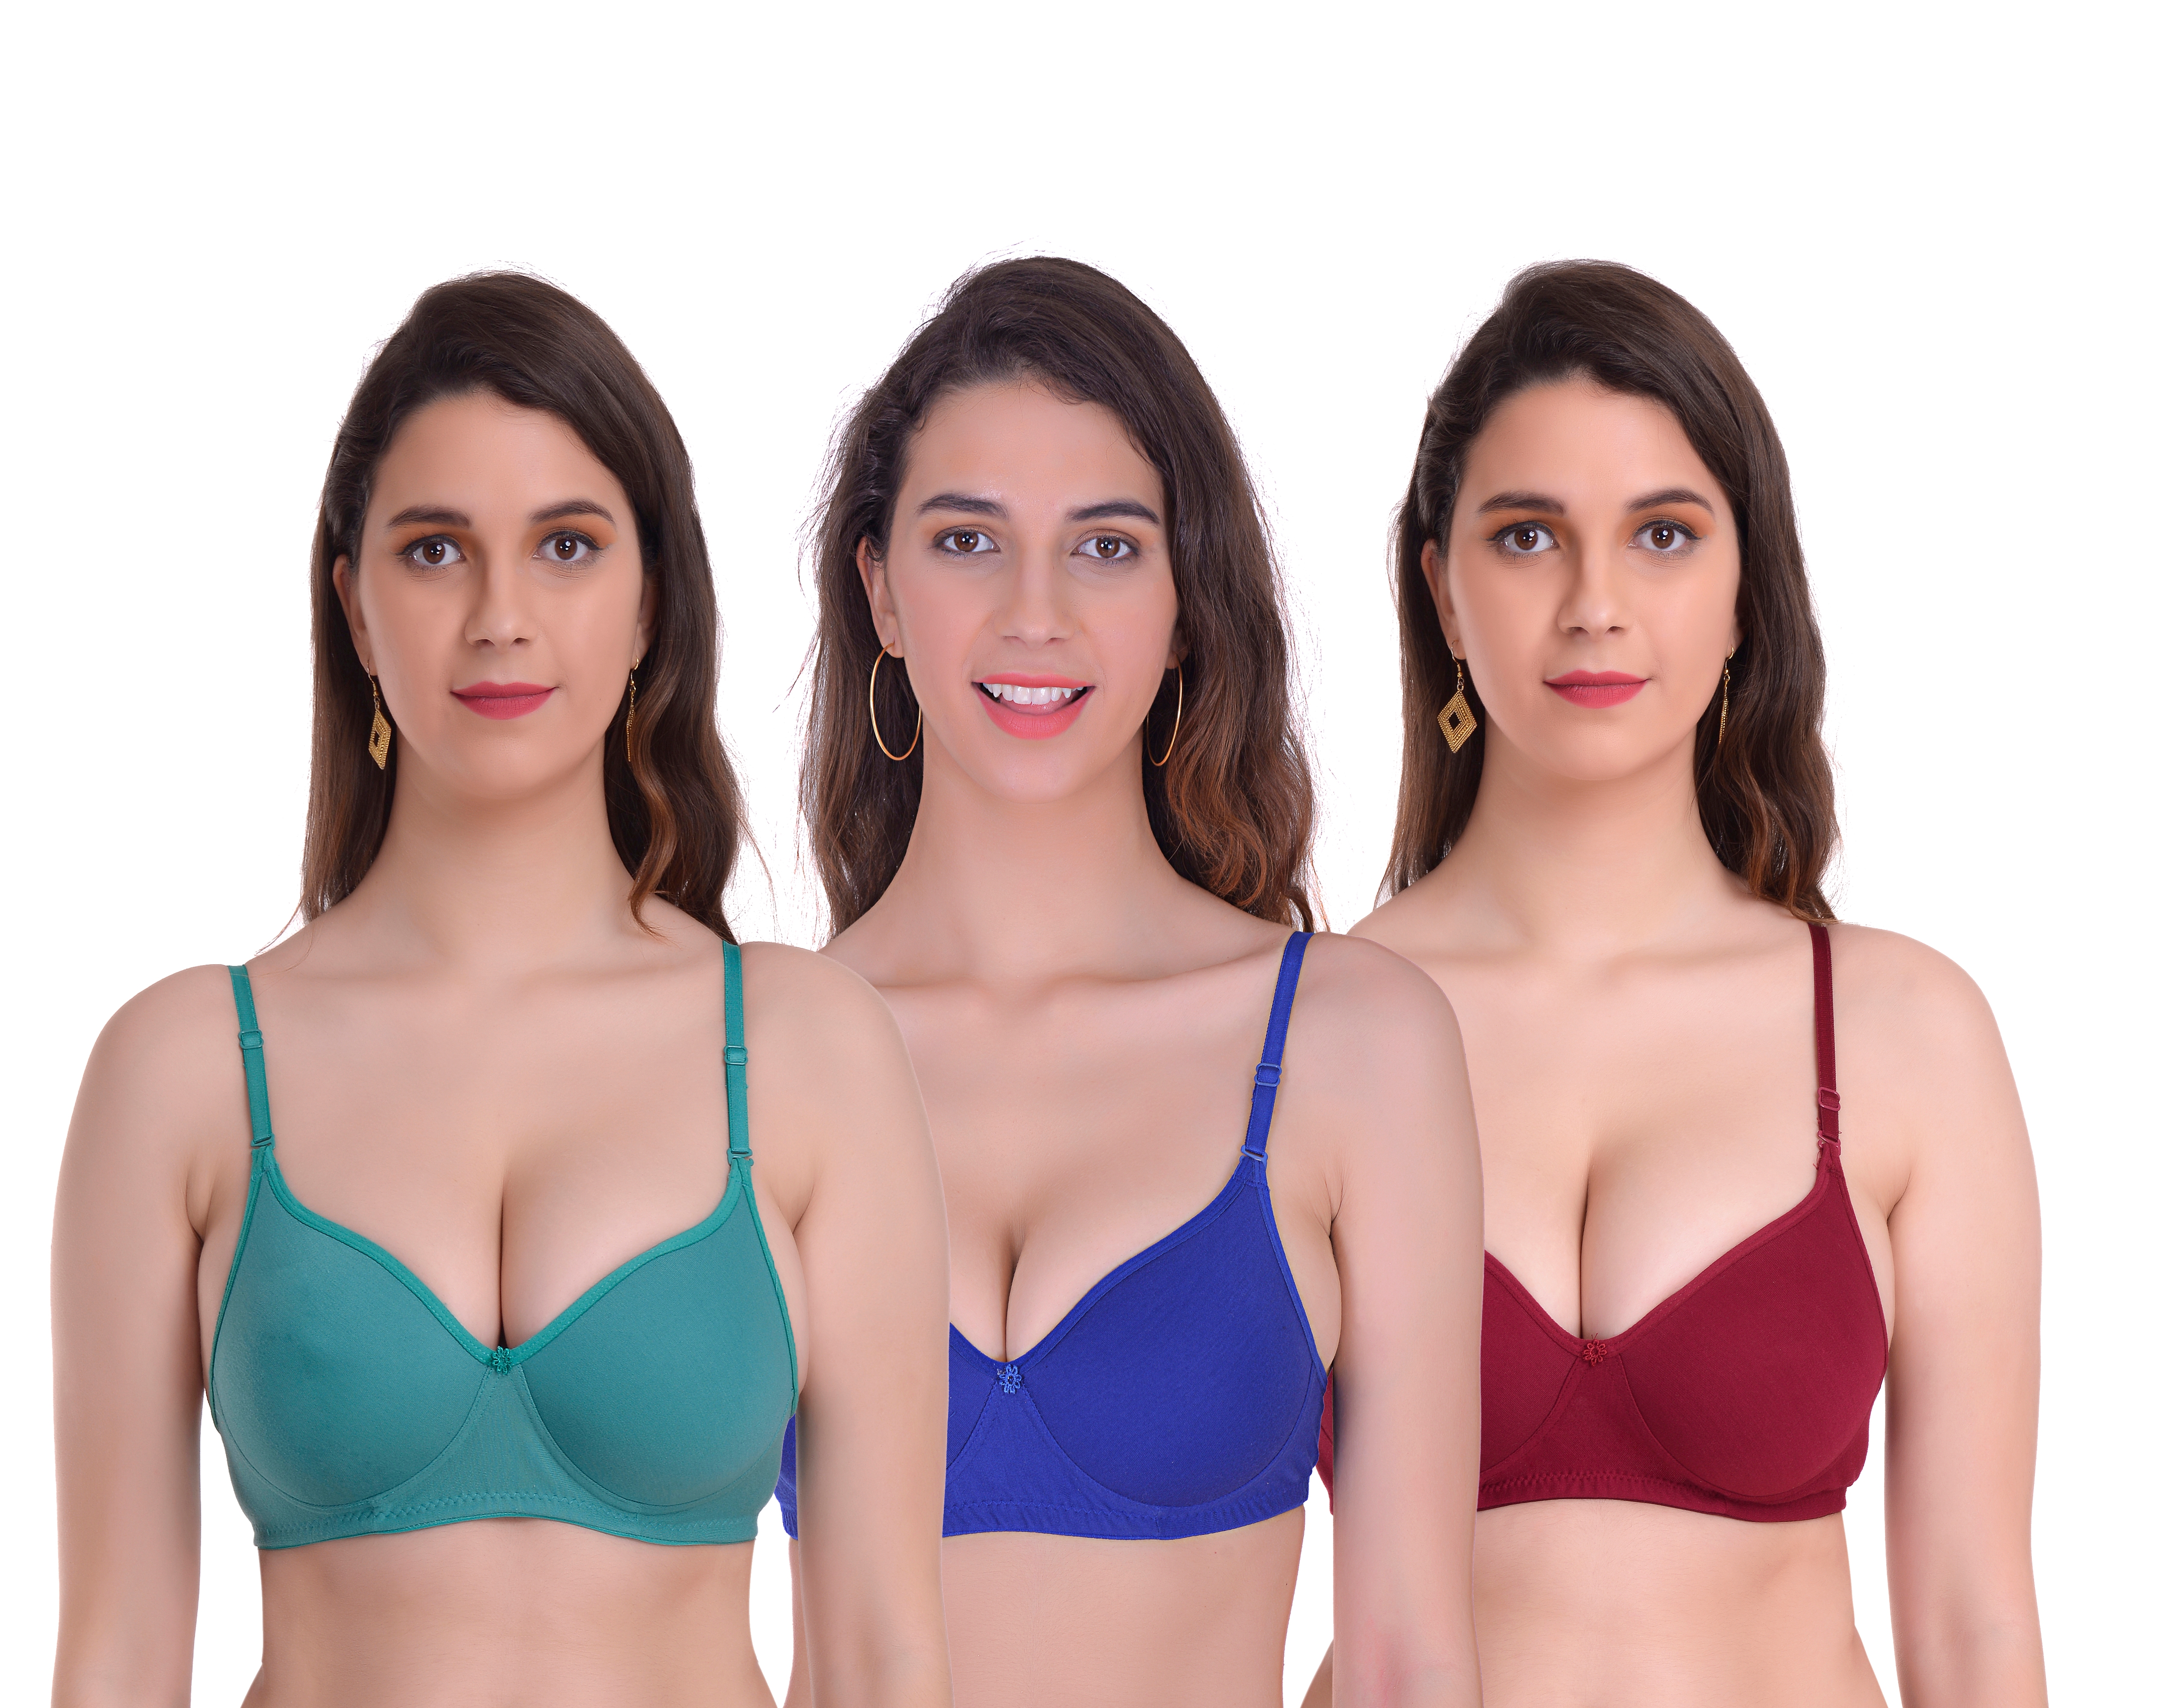 Mynte Women's Cotton Rich Lightly Padded Non-Wired Full Cup Regular Bra (Pack of 3) (Green/Blue/Maroon,30) (MY-CPPB-7GBLM-30)